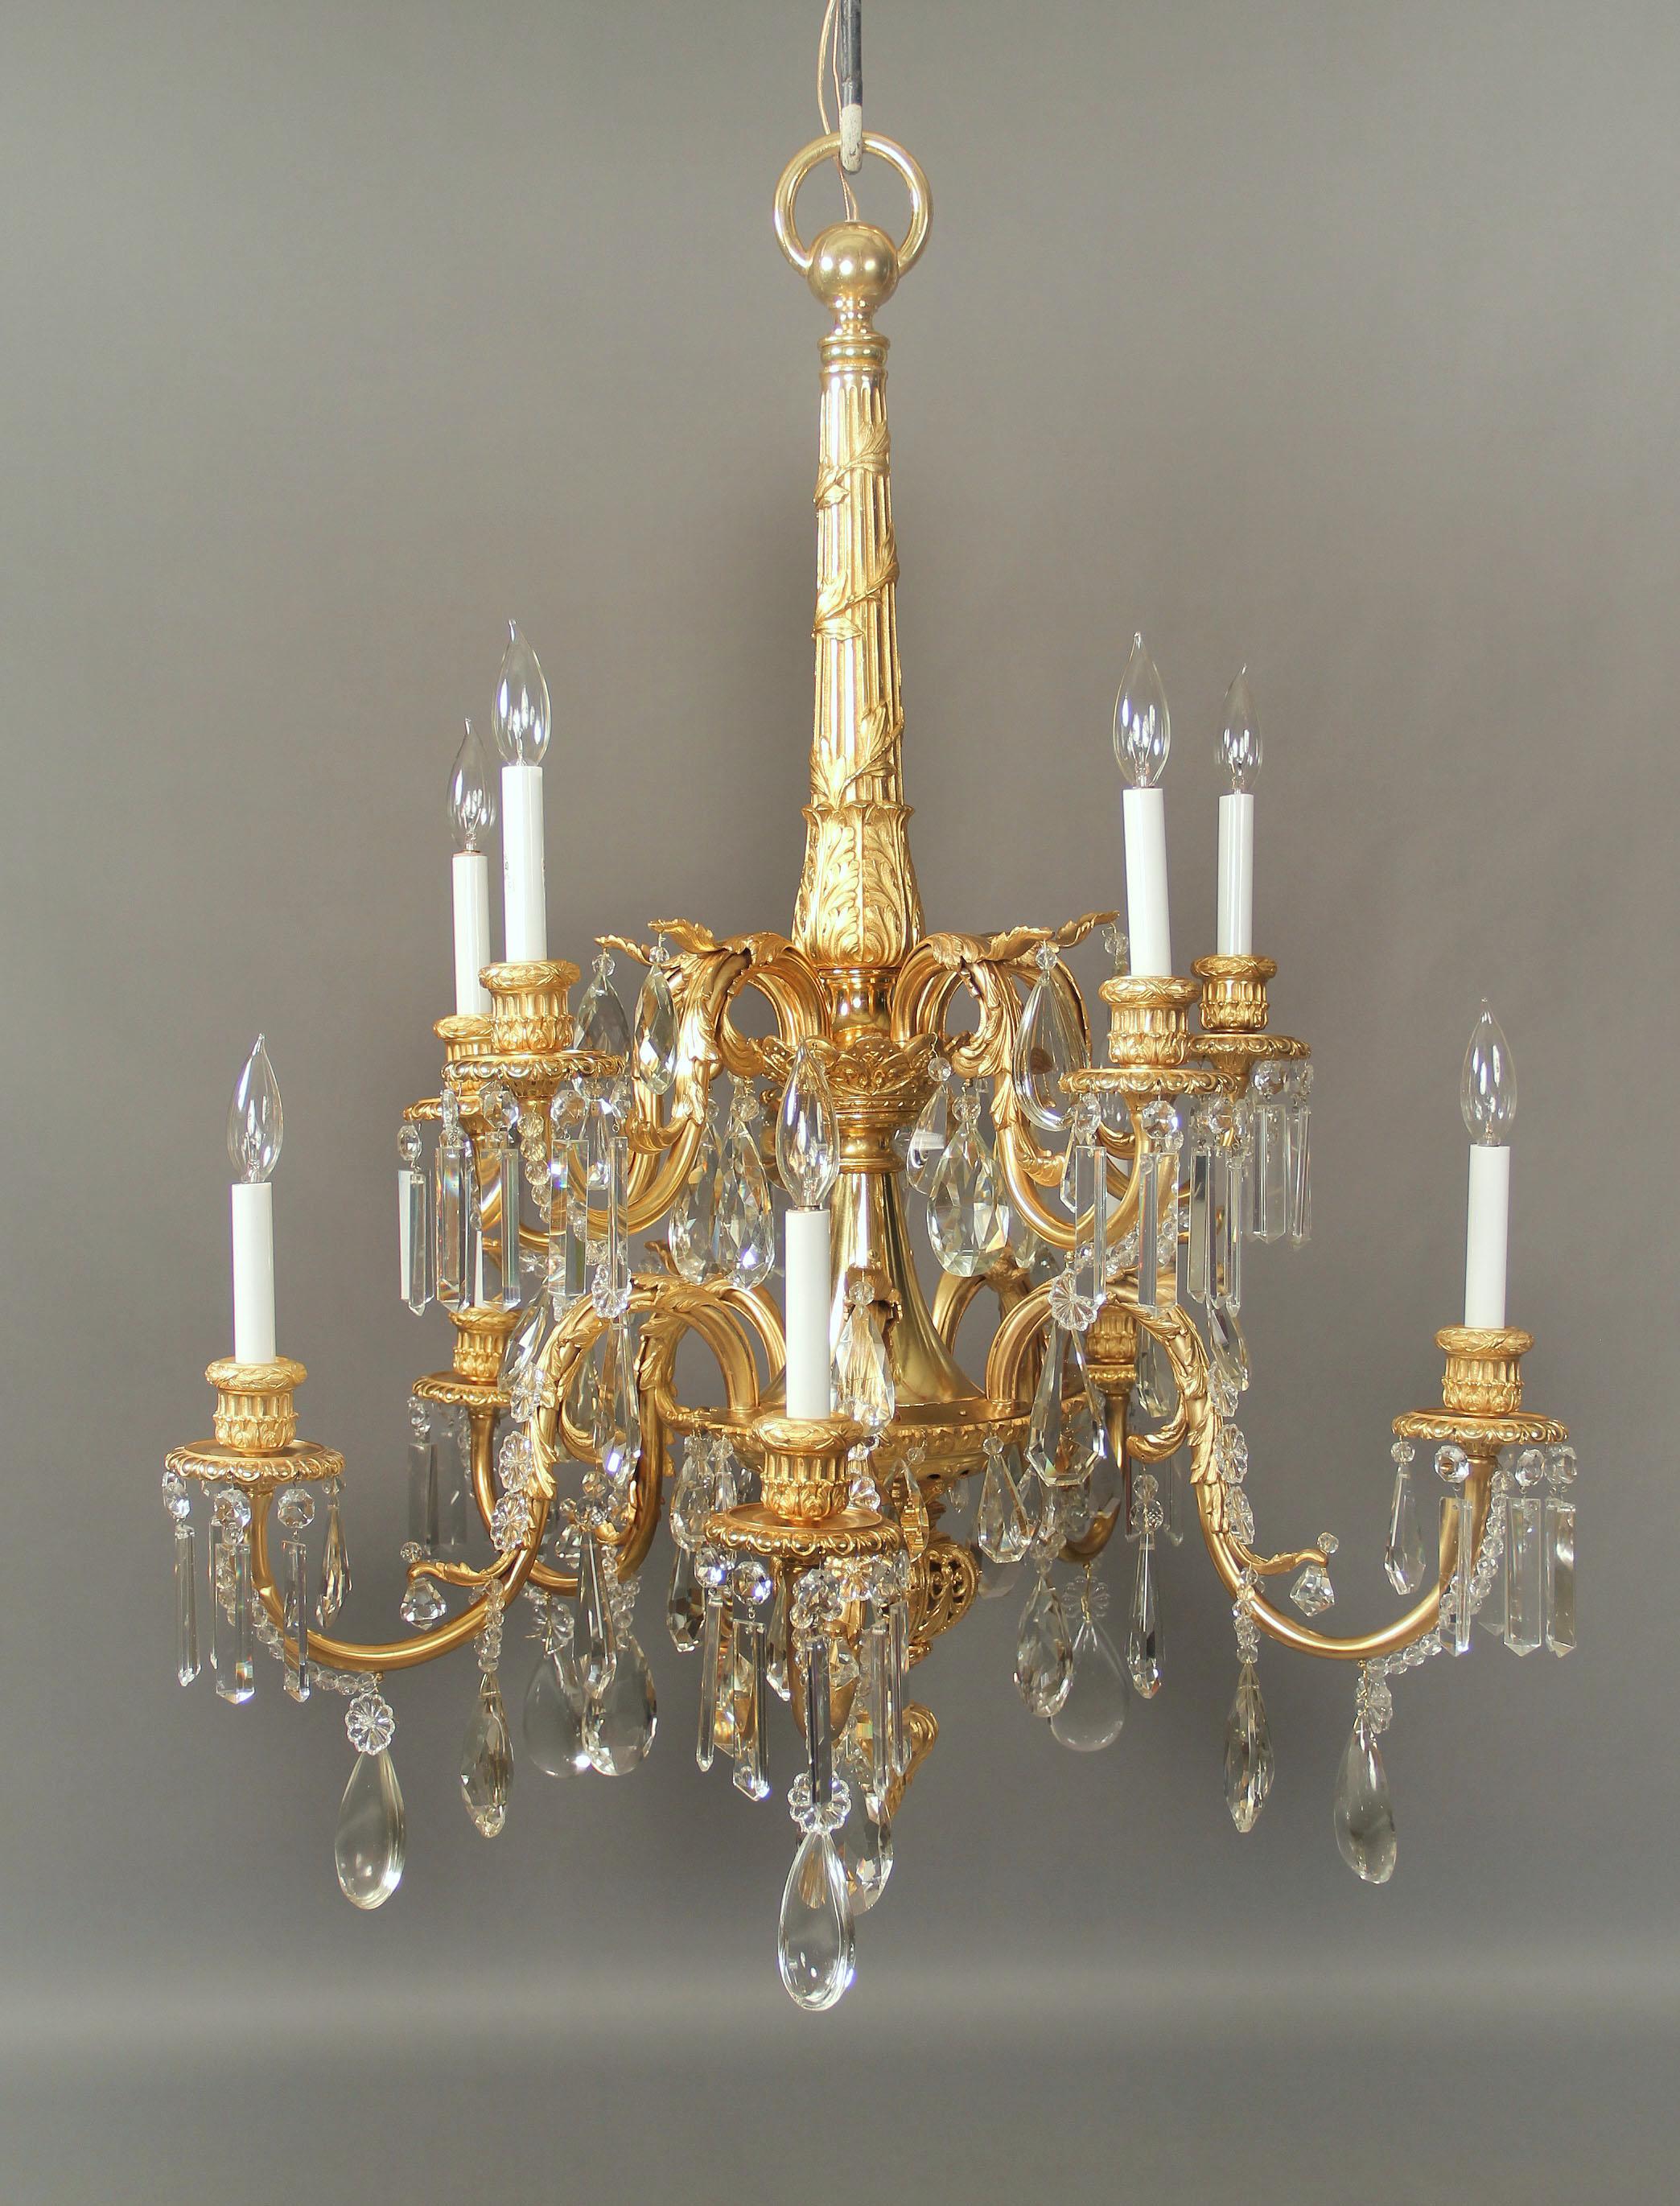 A stunning late 19th century gilt bronze and crystal ten-light chandelier.

Multifaceted and shaped crystal, an all bronze central column and neck, foliate designed arms with ten tiered perimeter lights.